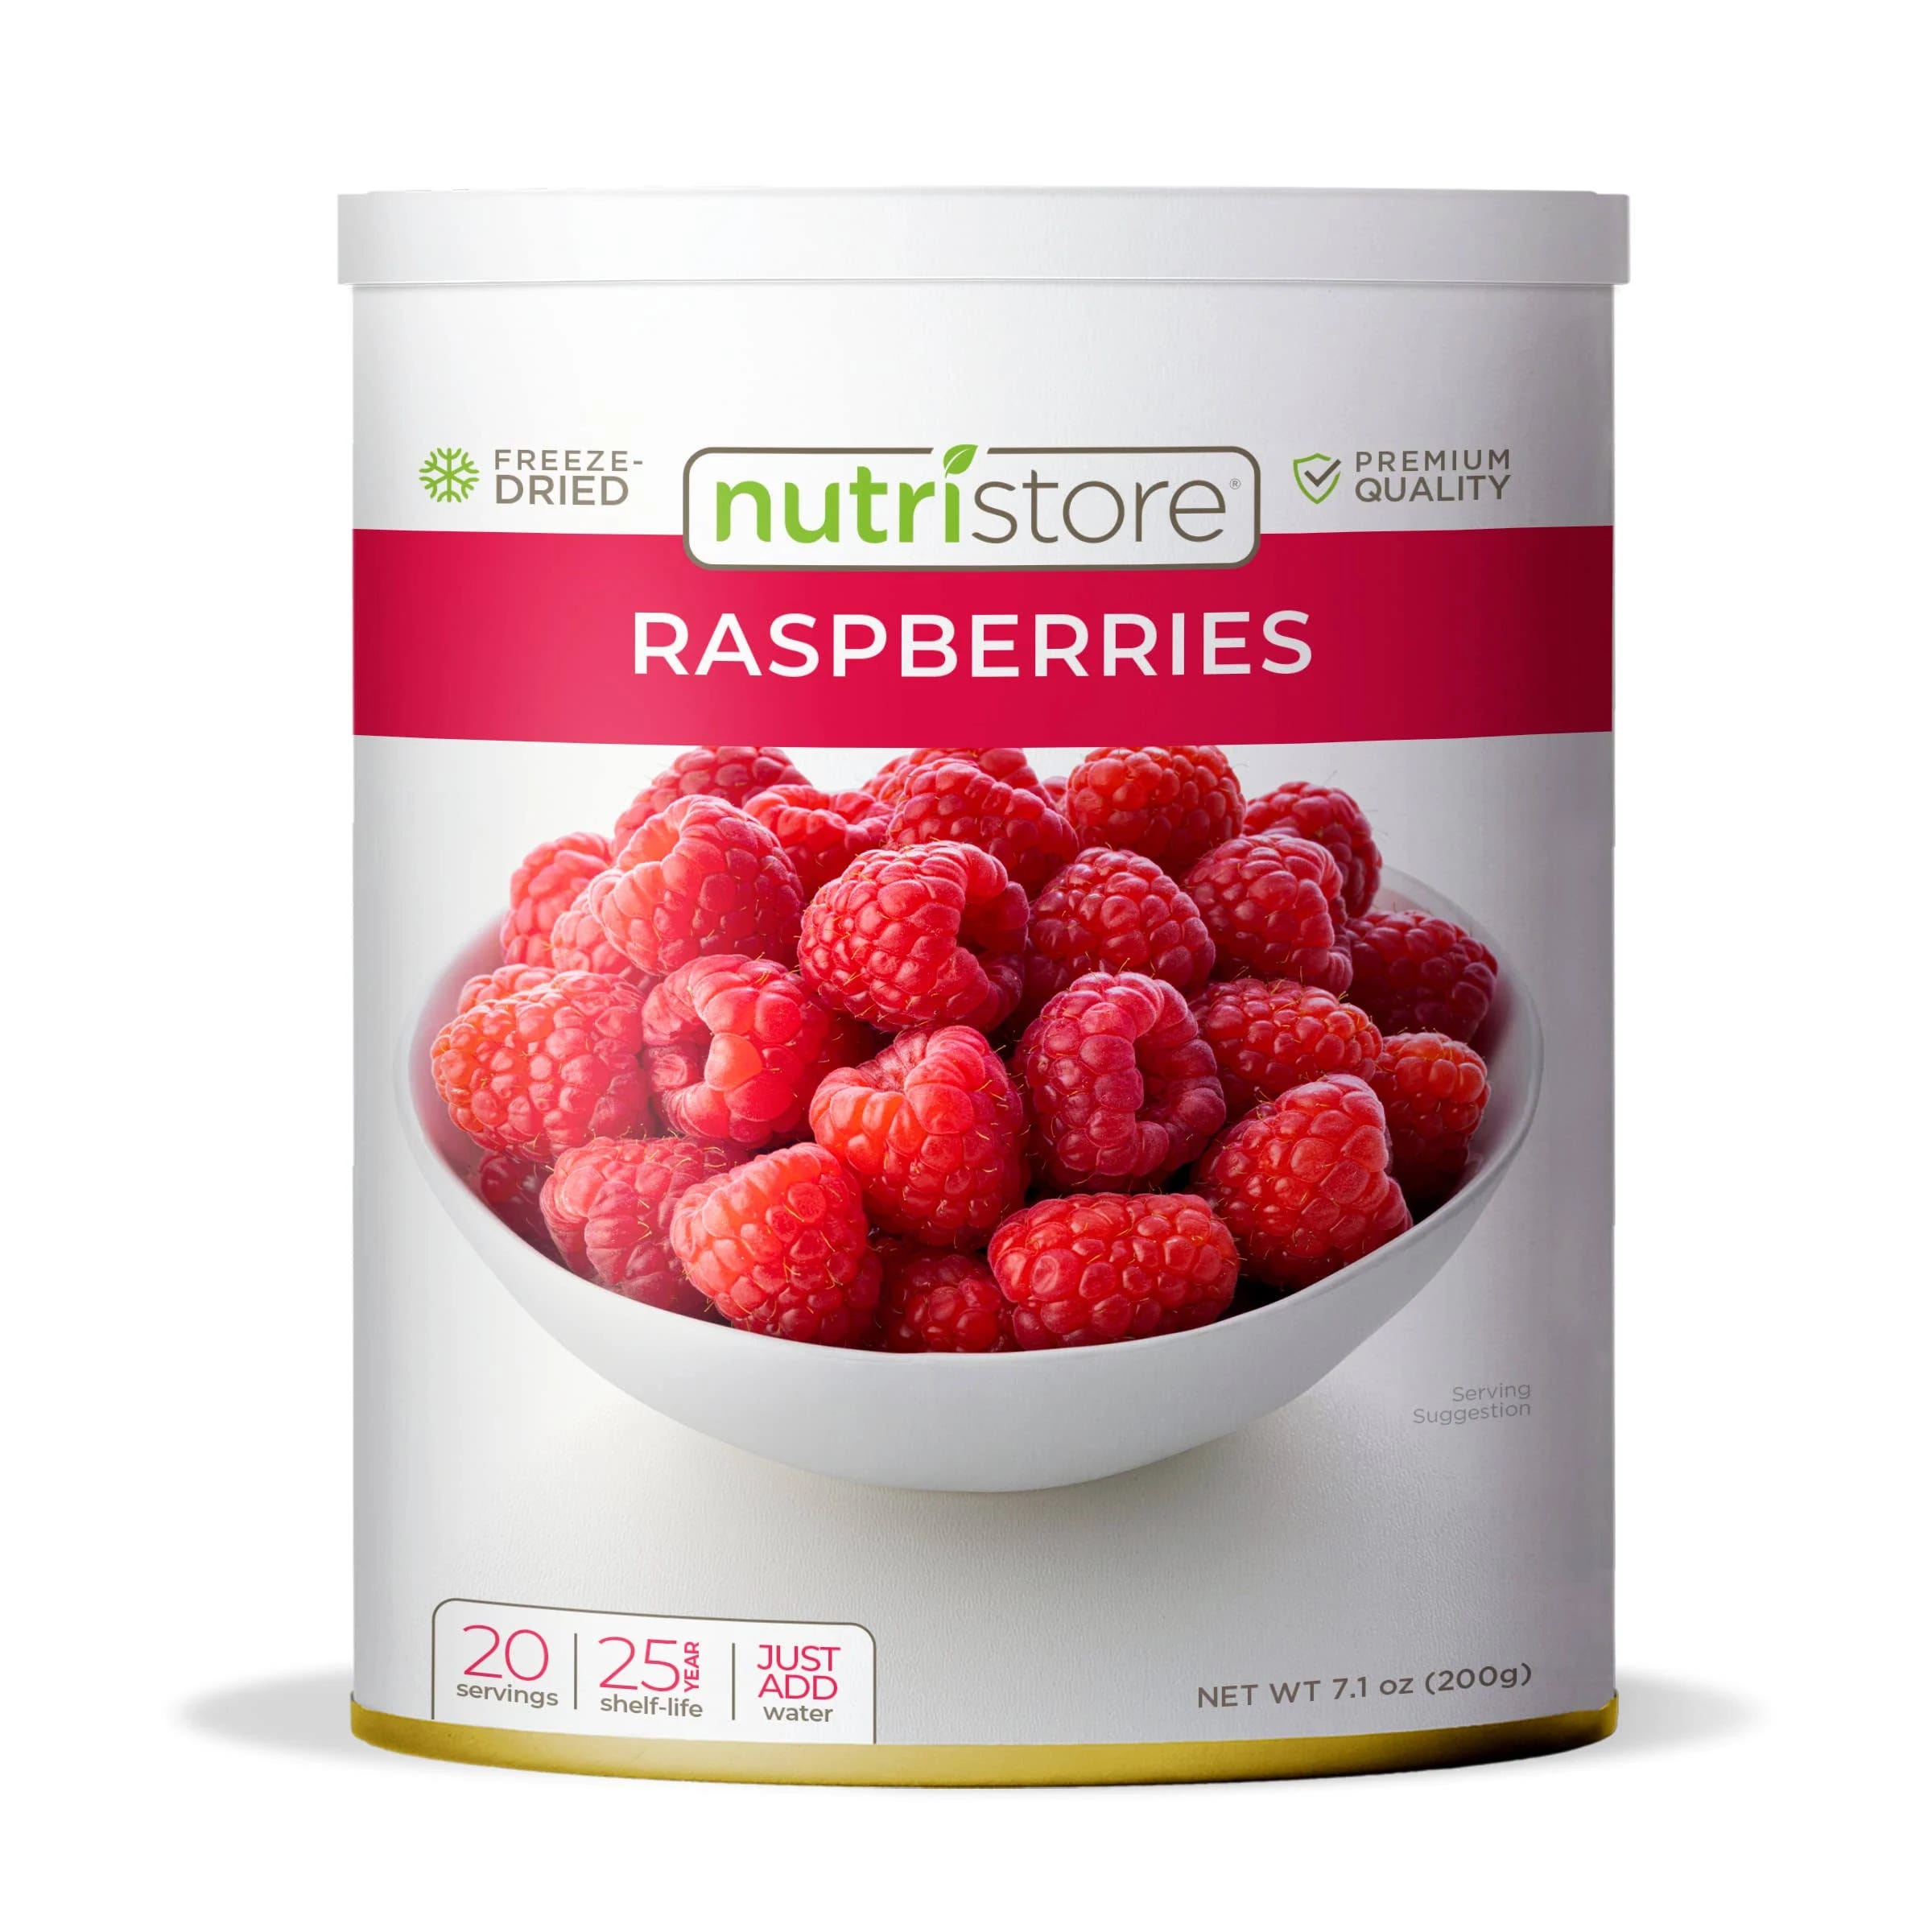 Nutristore 25-Year Shelf Life Freeze Dried Raspberries - Simple to Rehydrate, Great for Snacks and Camping | Image